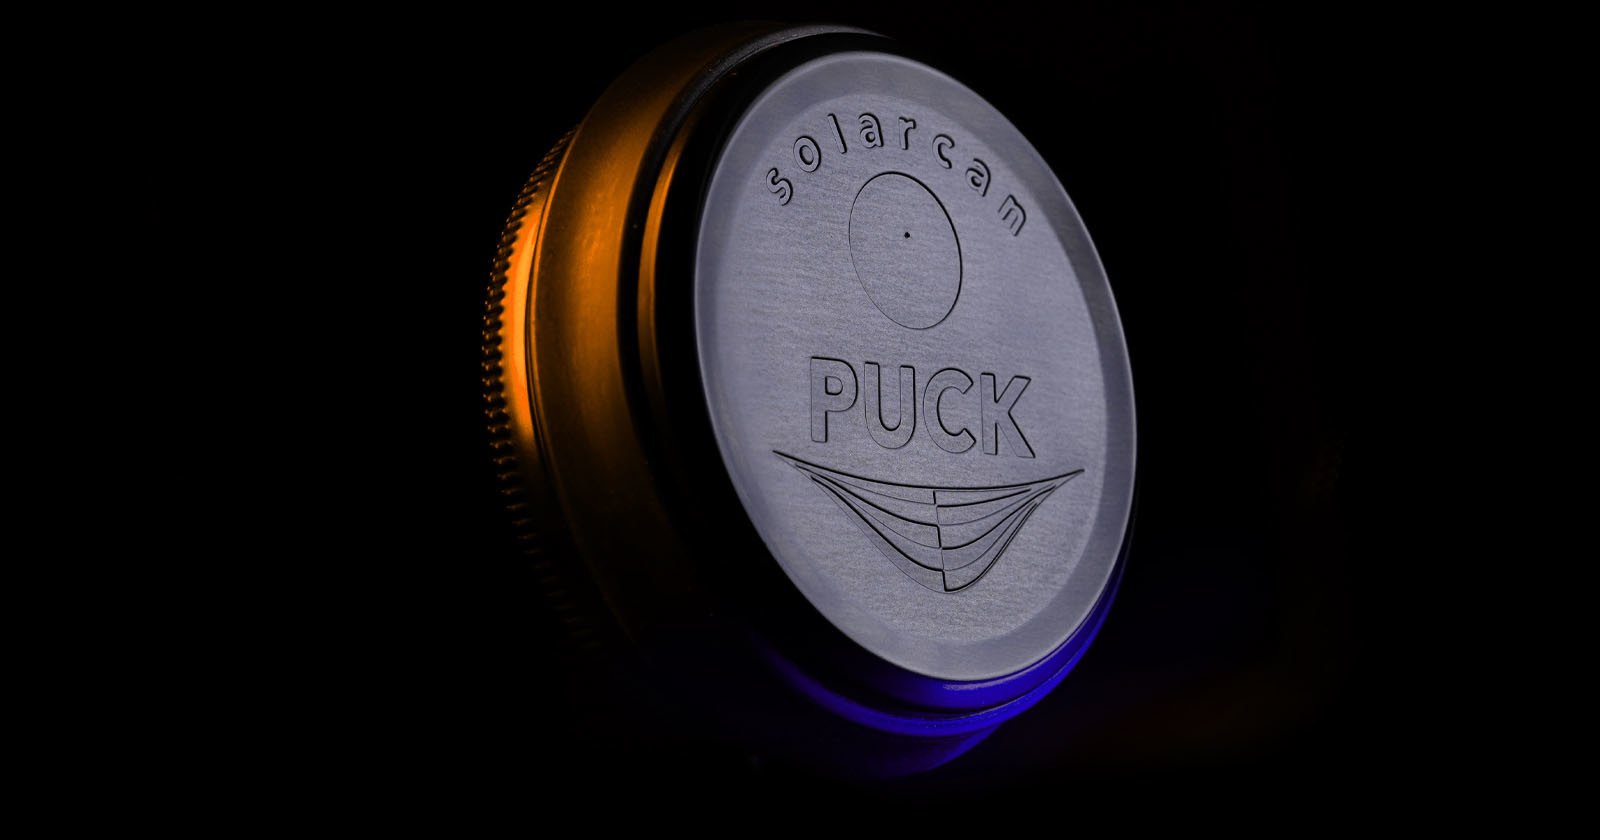 The Solarcan Puck is a Single-Day Time Exposure Pinhole Camera